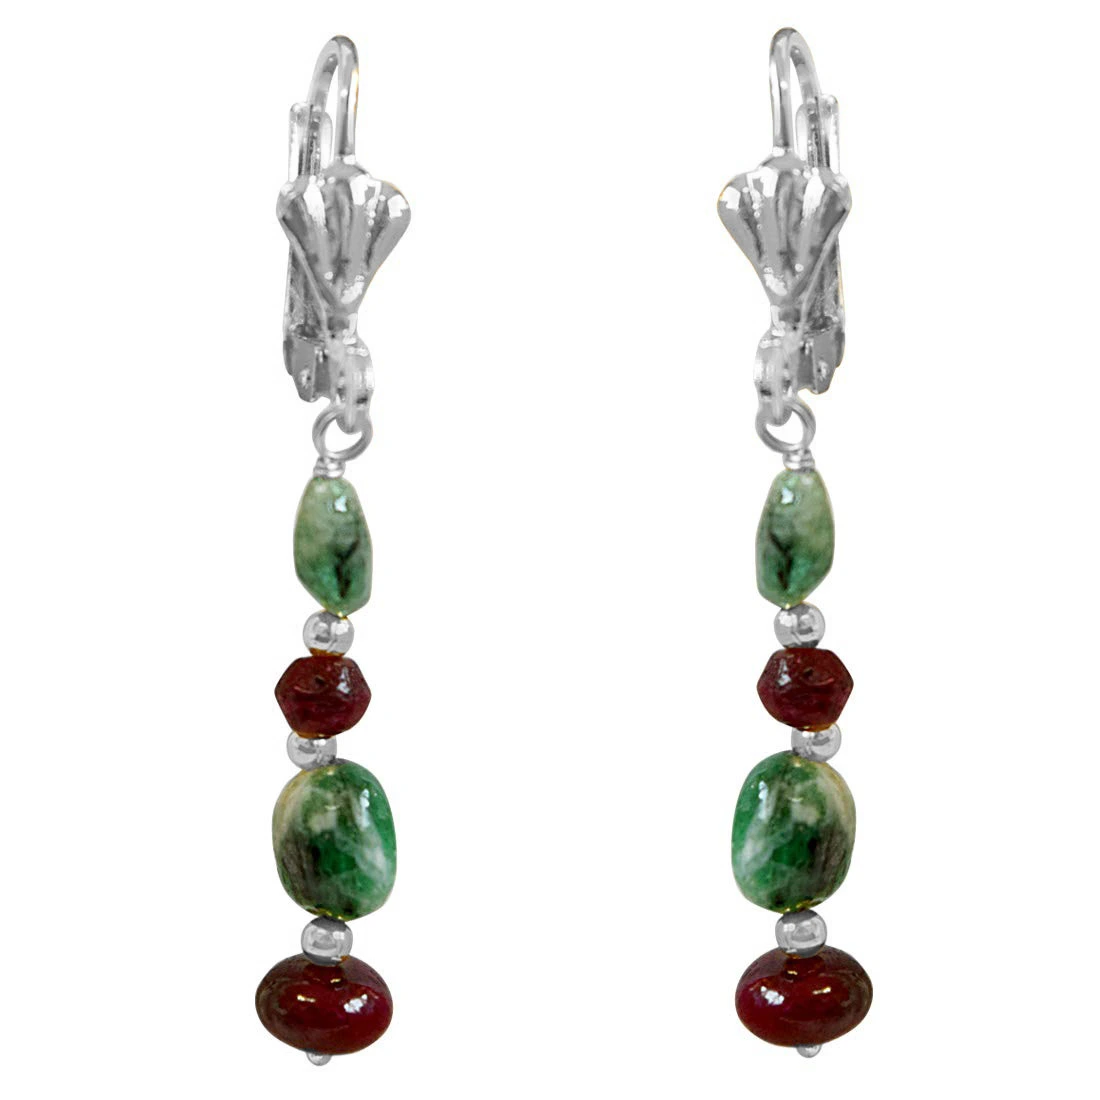 Real Oval Green Emerald, Red Ruby & Silver Plated Beads Hanging Earrings for Women (SE354)